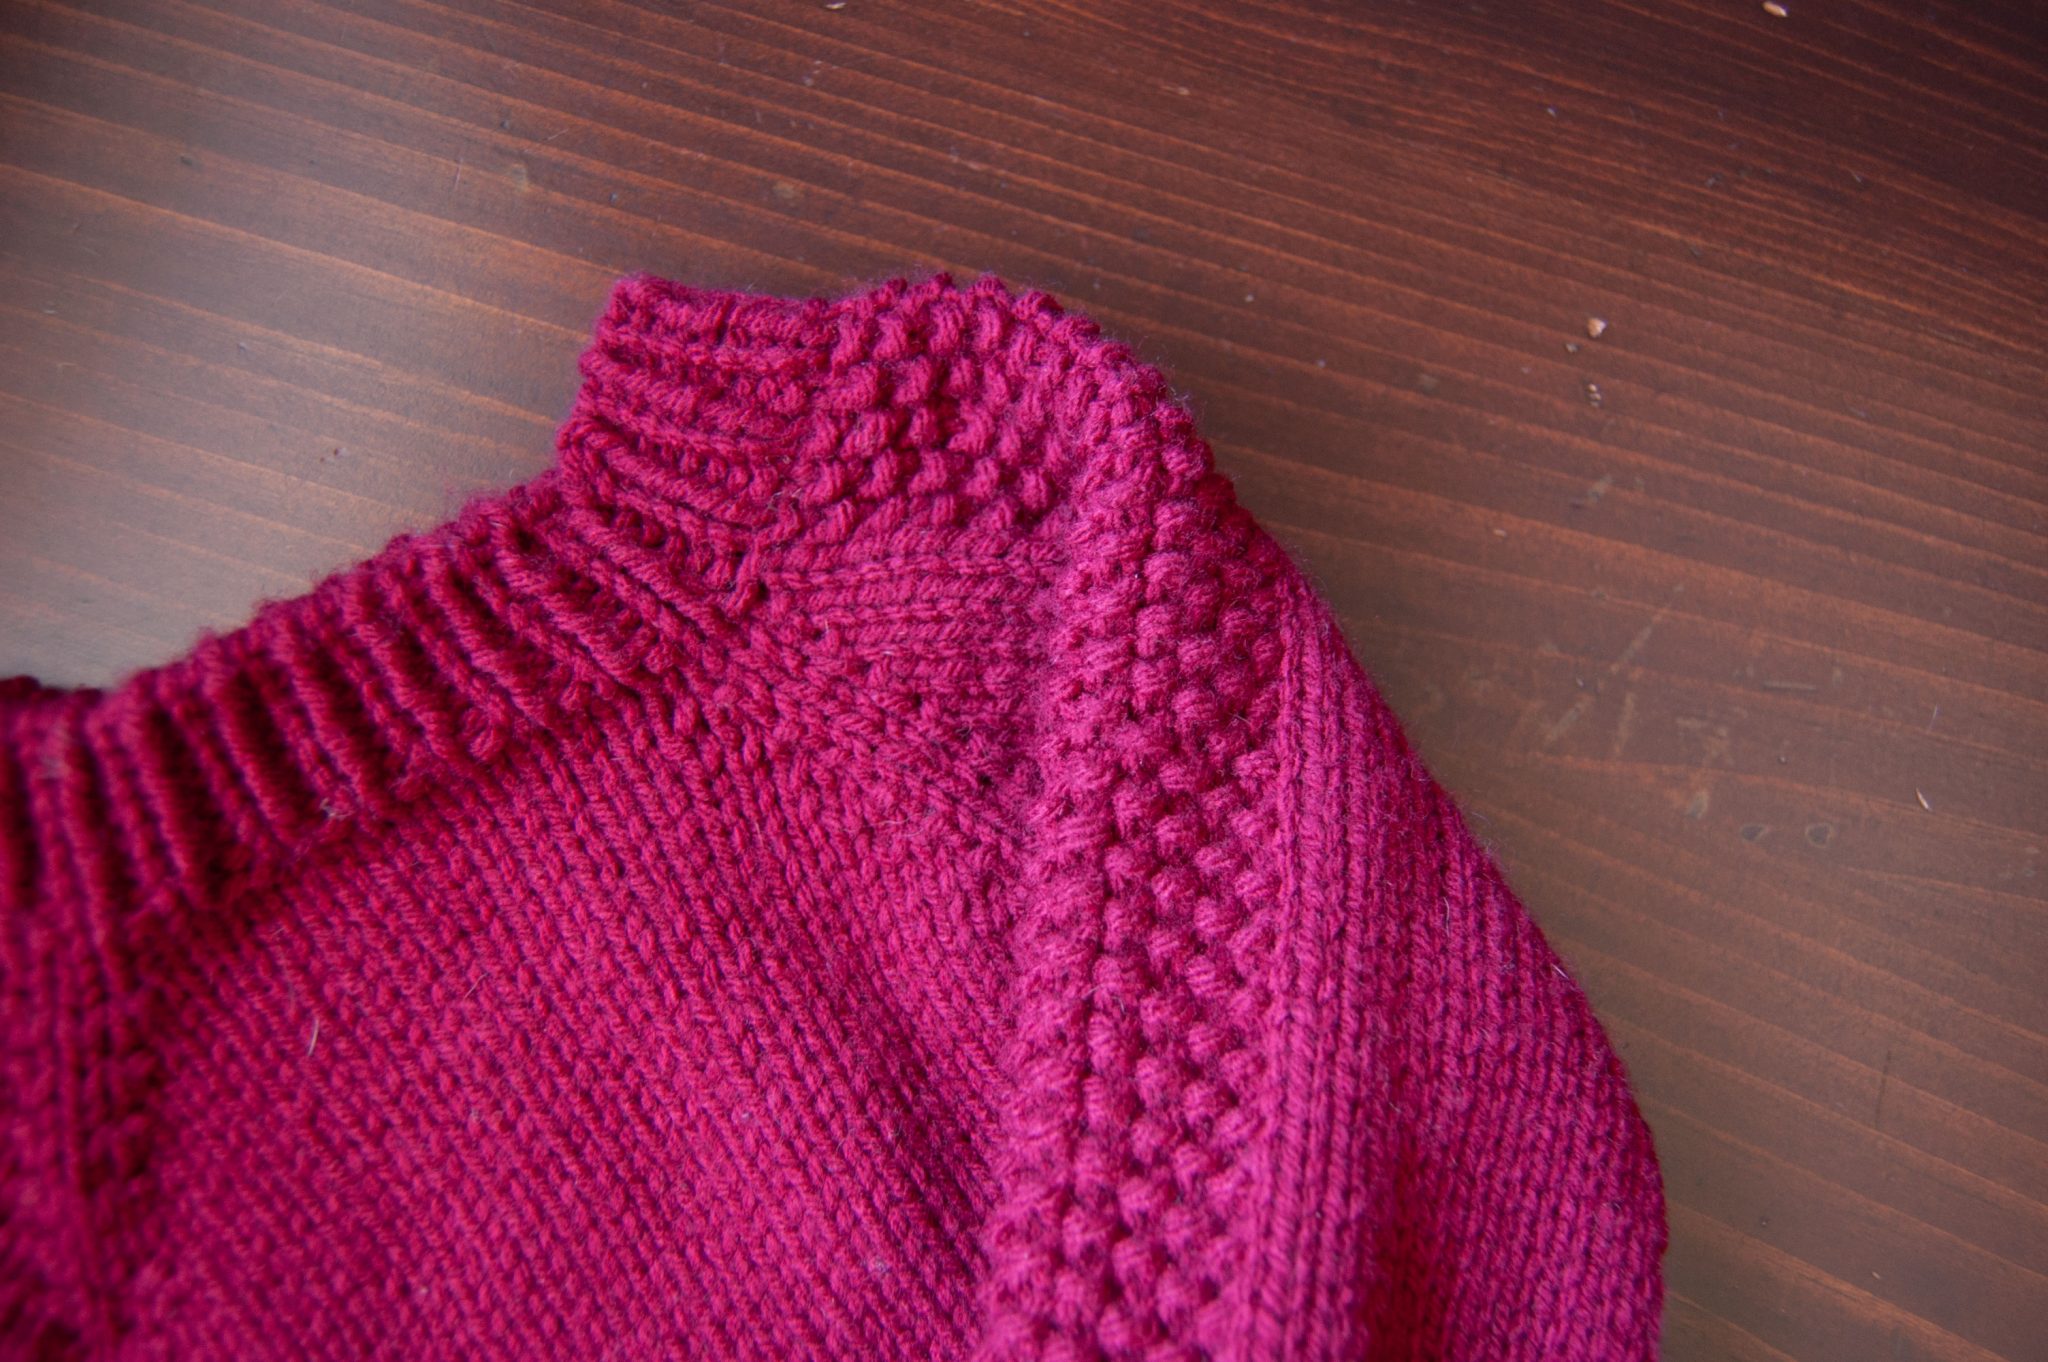 Flax Sweater (for Baby) In Loops & Threads Impeccable - Budget Yarn Reviews